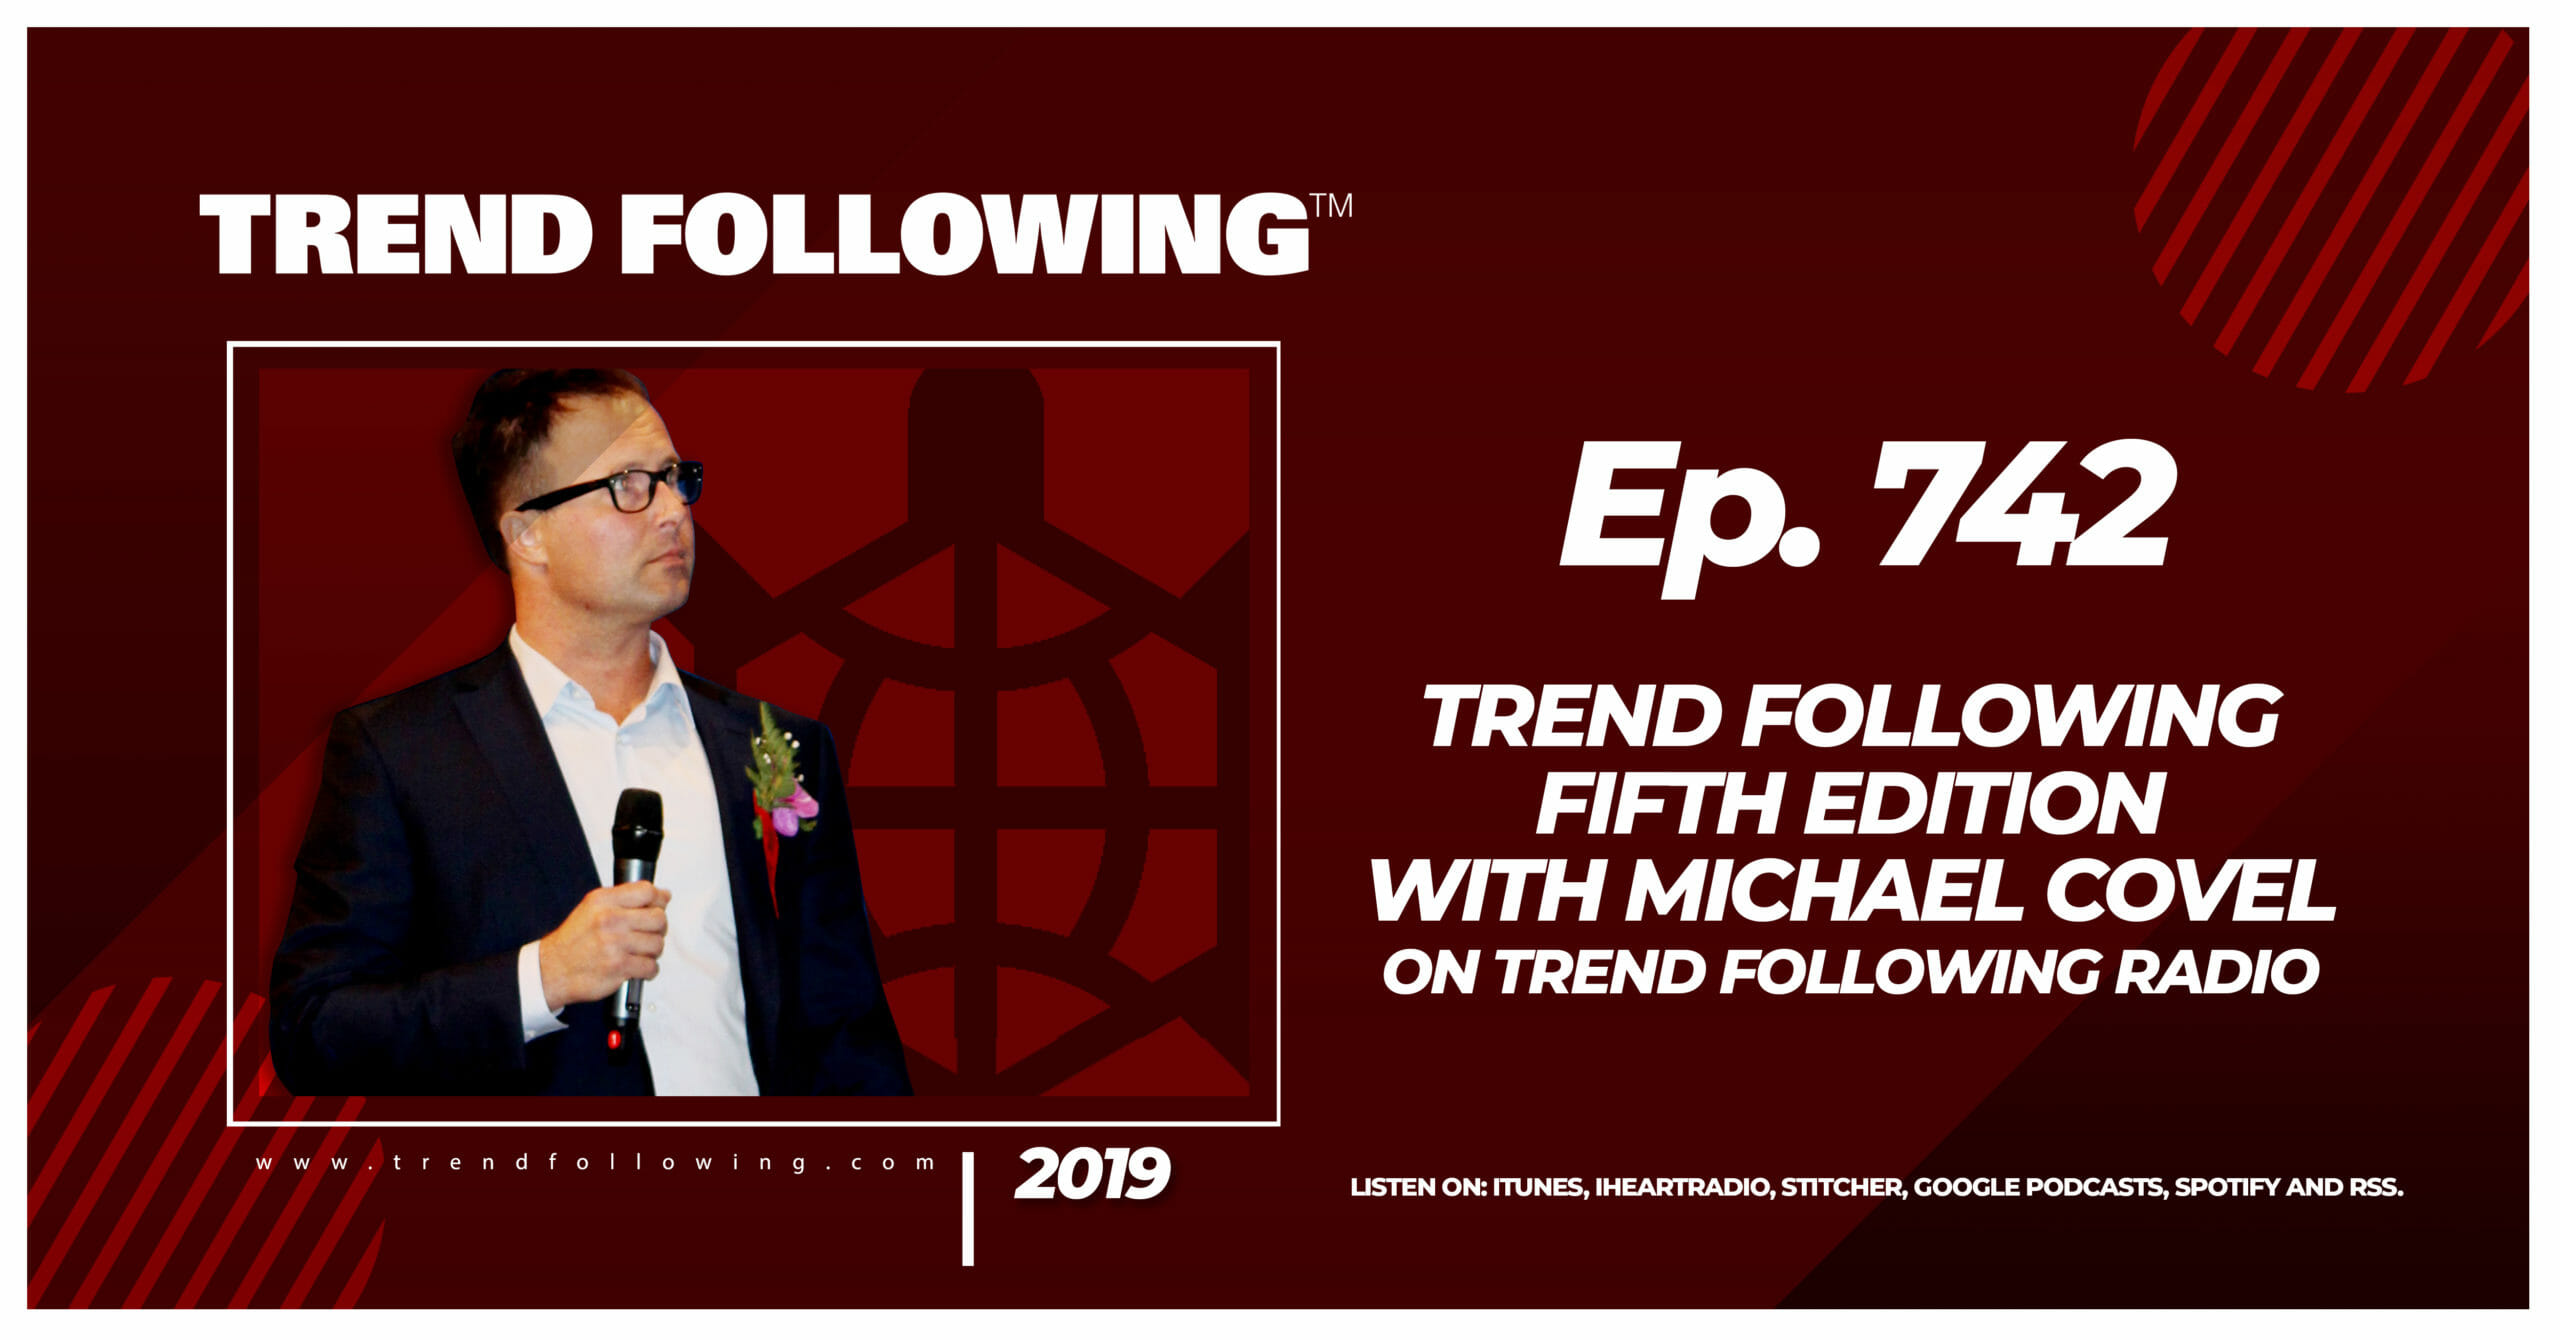 Trend Following Fifth Edition with Michael Covel